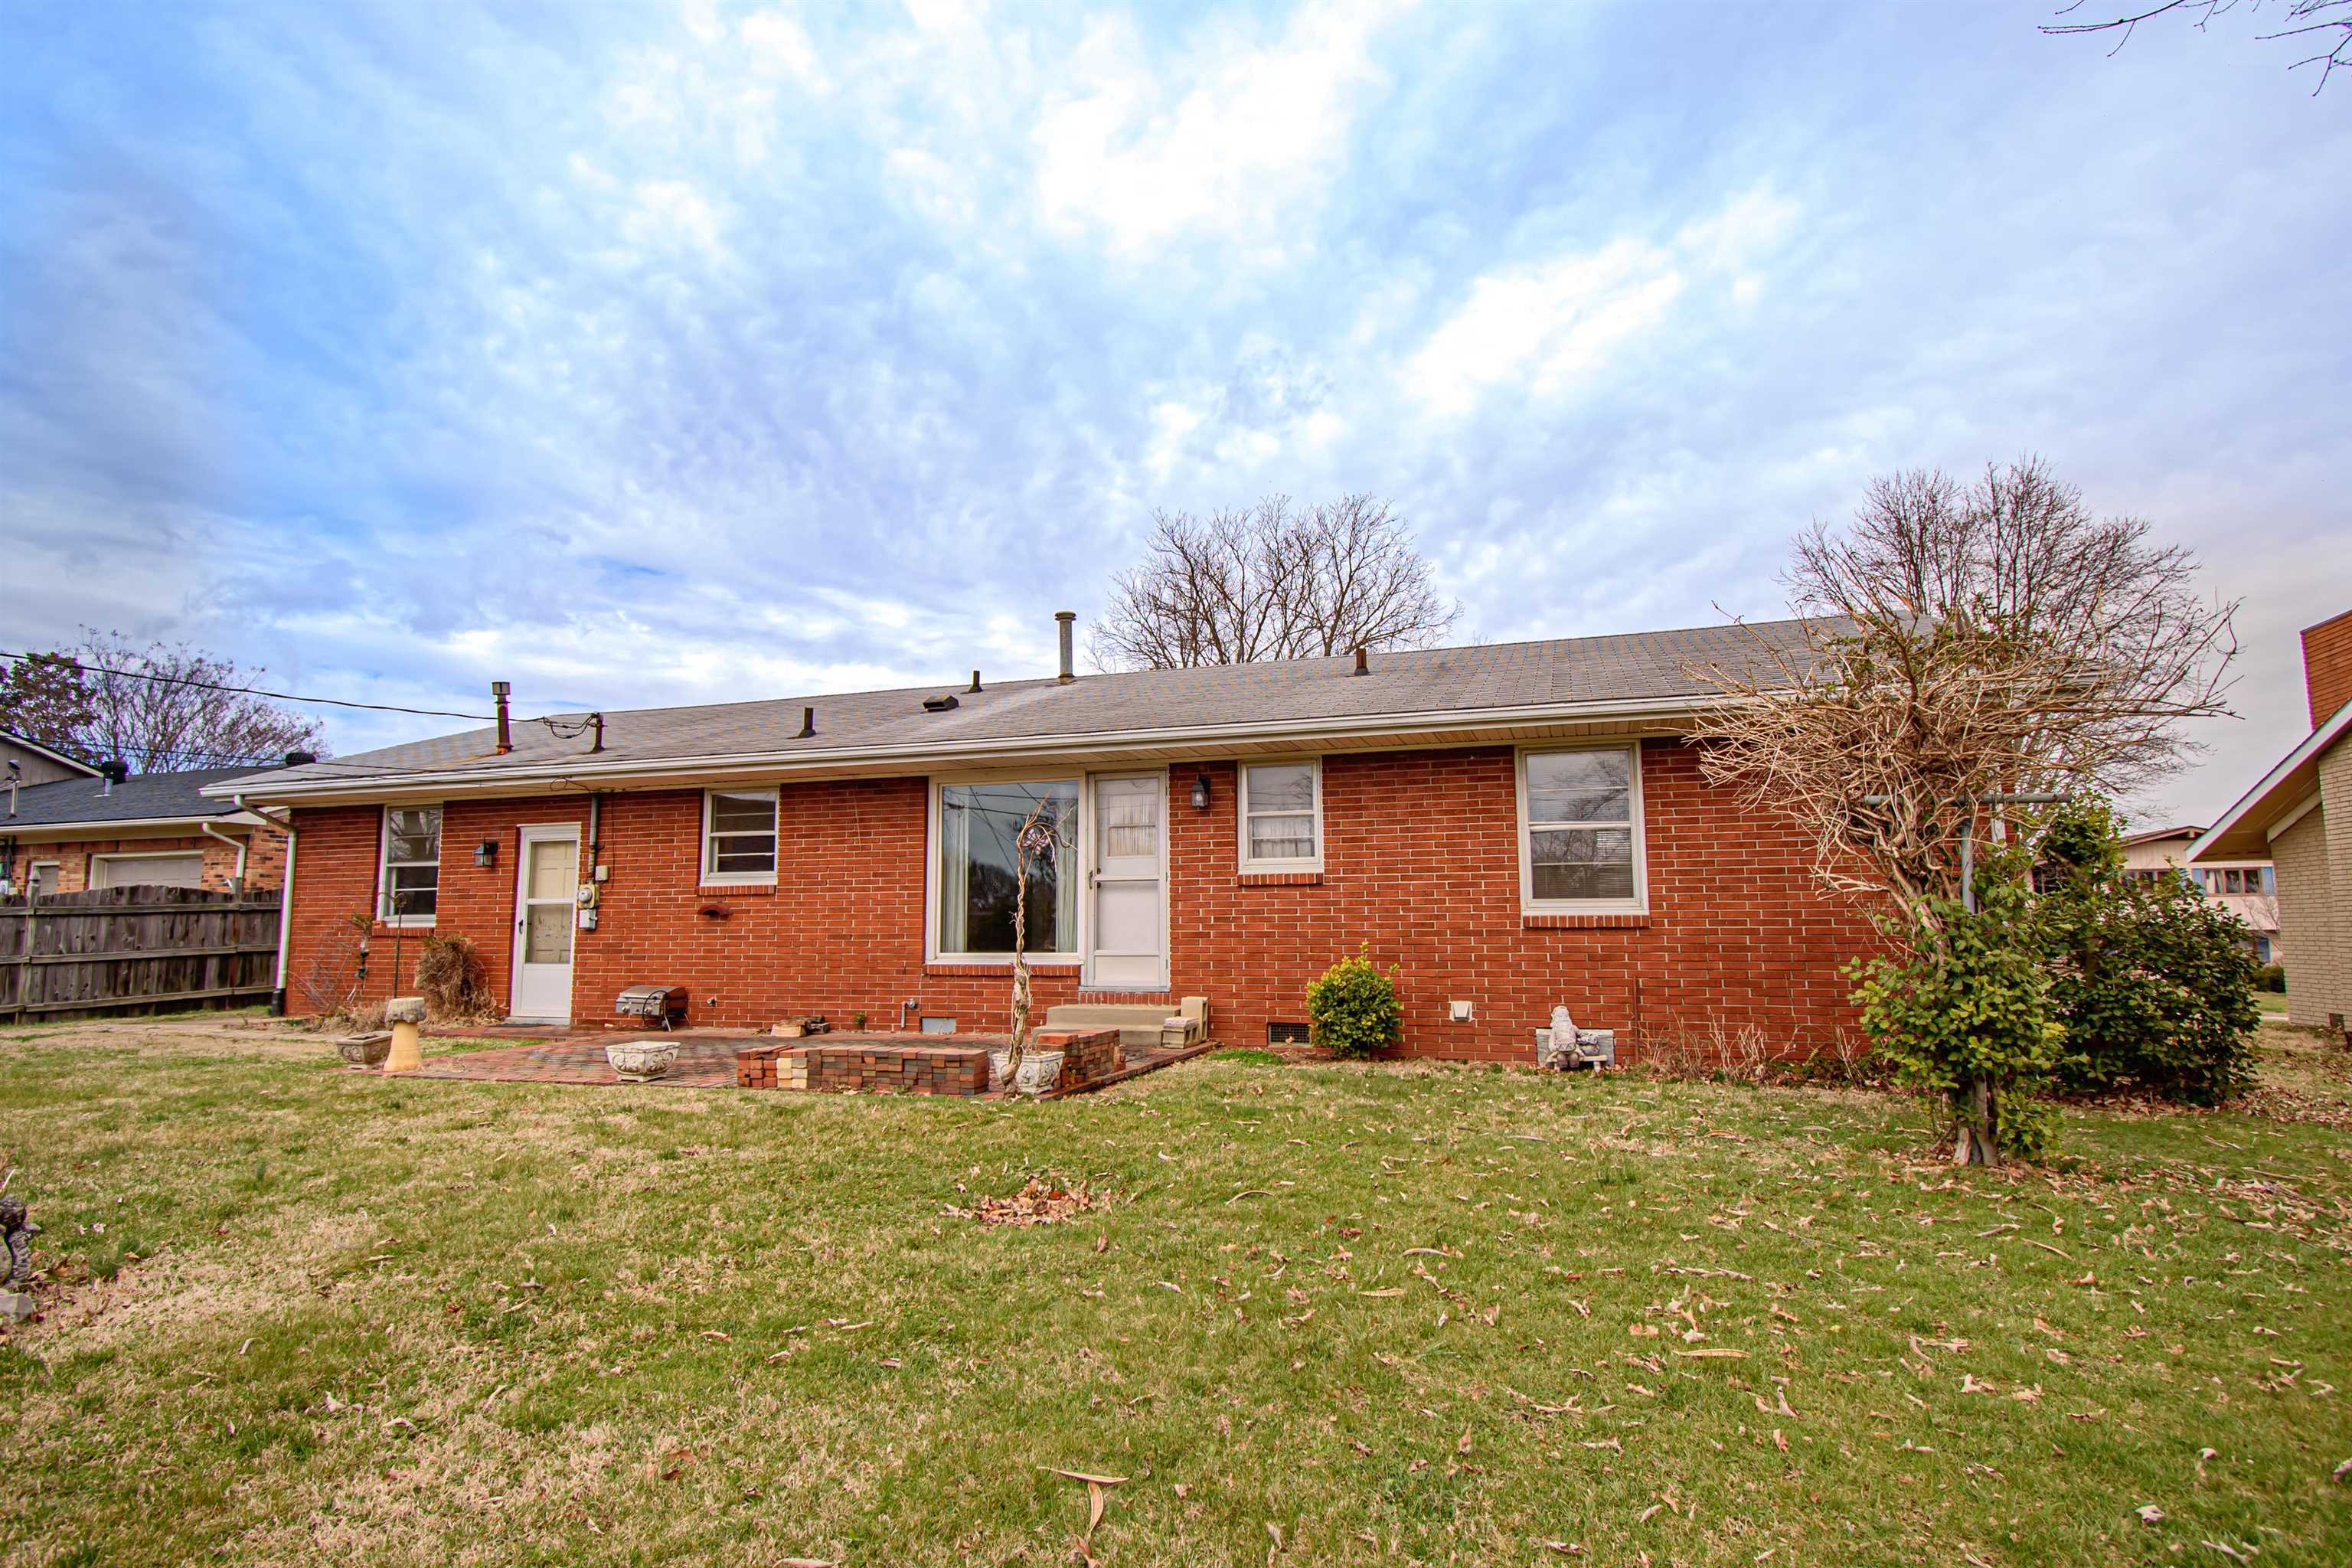 924 Parkway Drive, Owensboro, Kentucky 42303-6449, 3 Bedrooms Bedrooms, ,2 BathroomsBathrooms,Single Family Residence,For Sale,Parkway Drive,89092